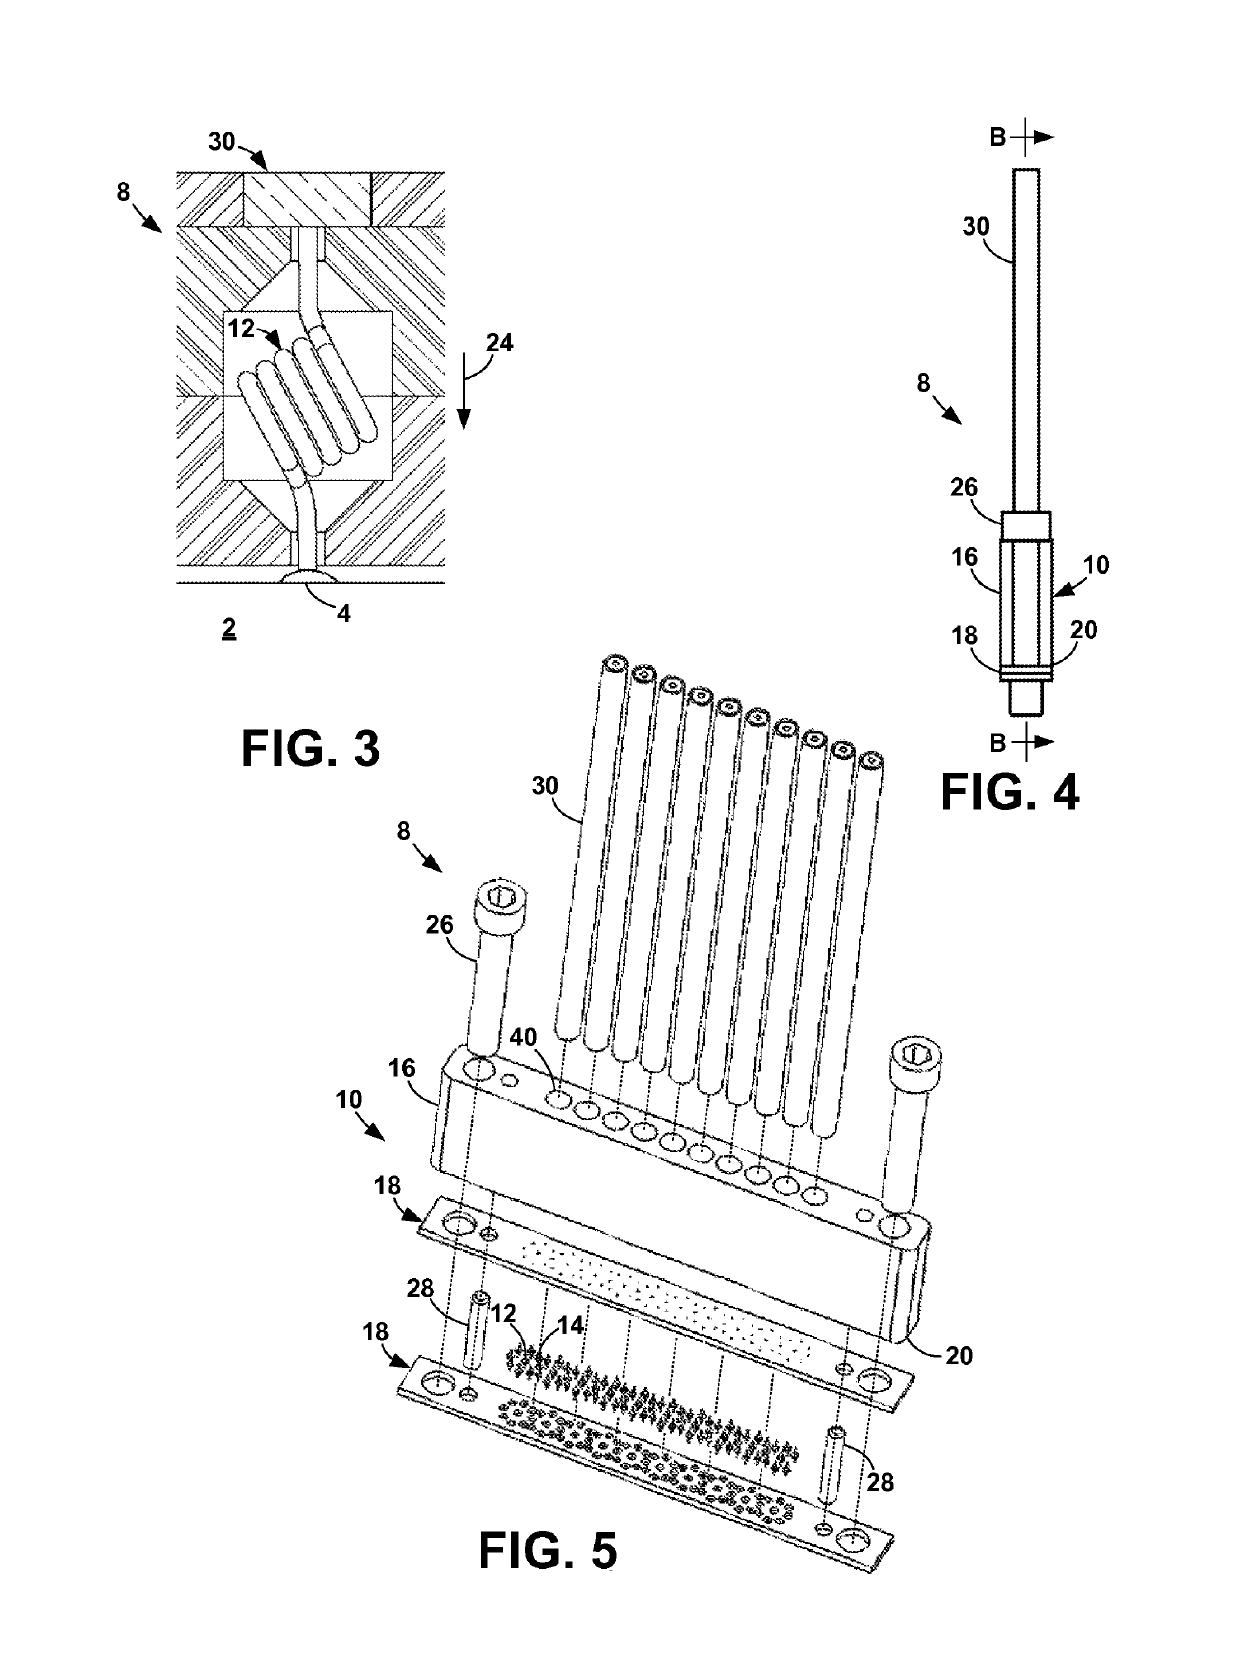 Controlled-impedance cable termination using compliant interconnect elements